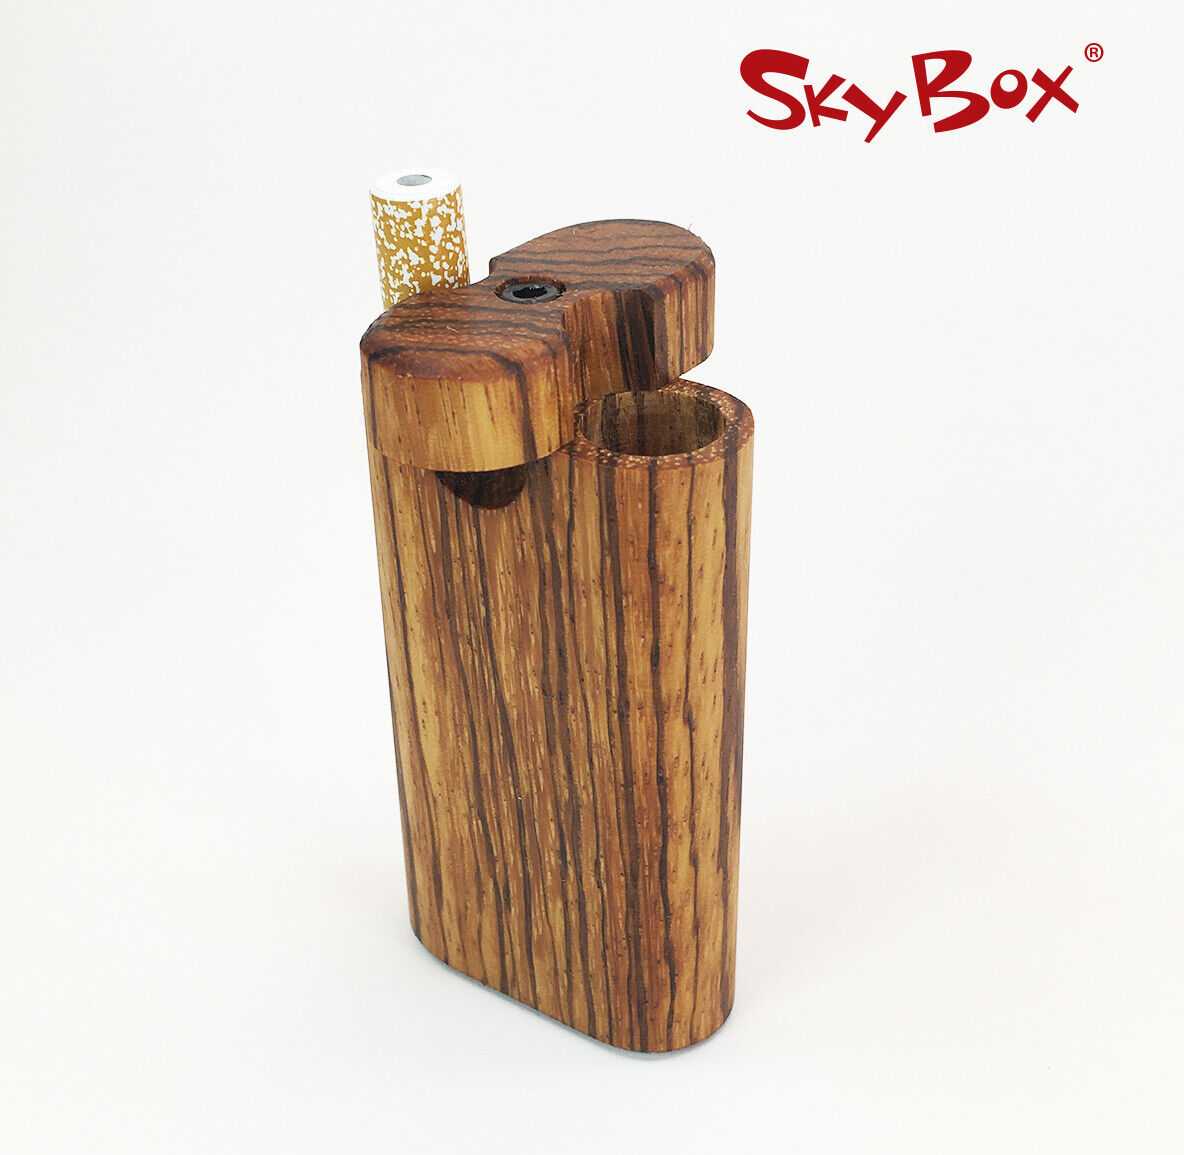 SkyBox® dugout -  ZebraWood w/ Small cigarette style Pipe - Portable Stash Box